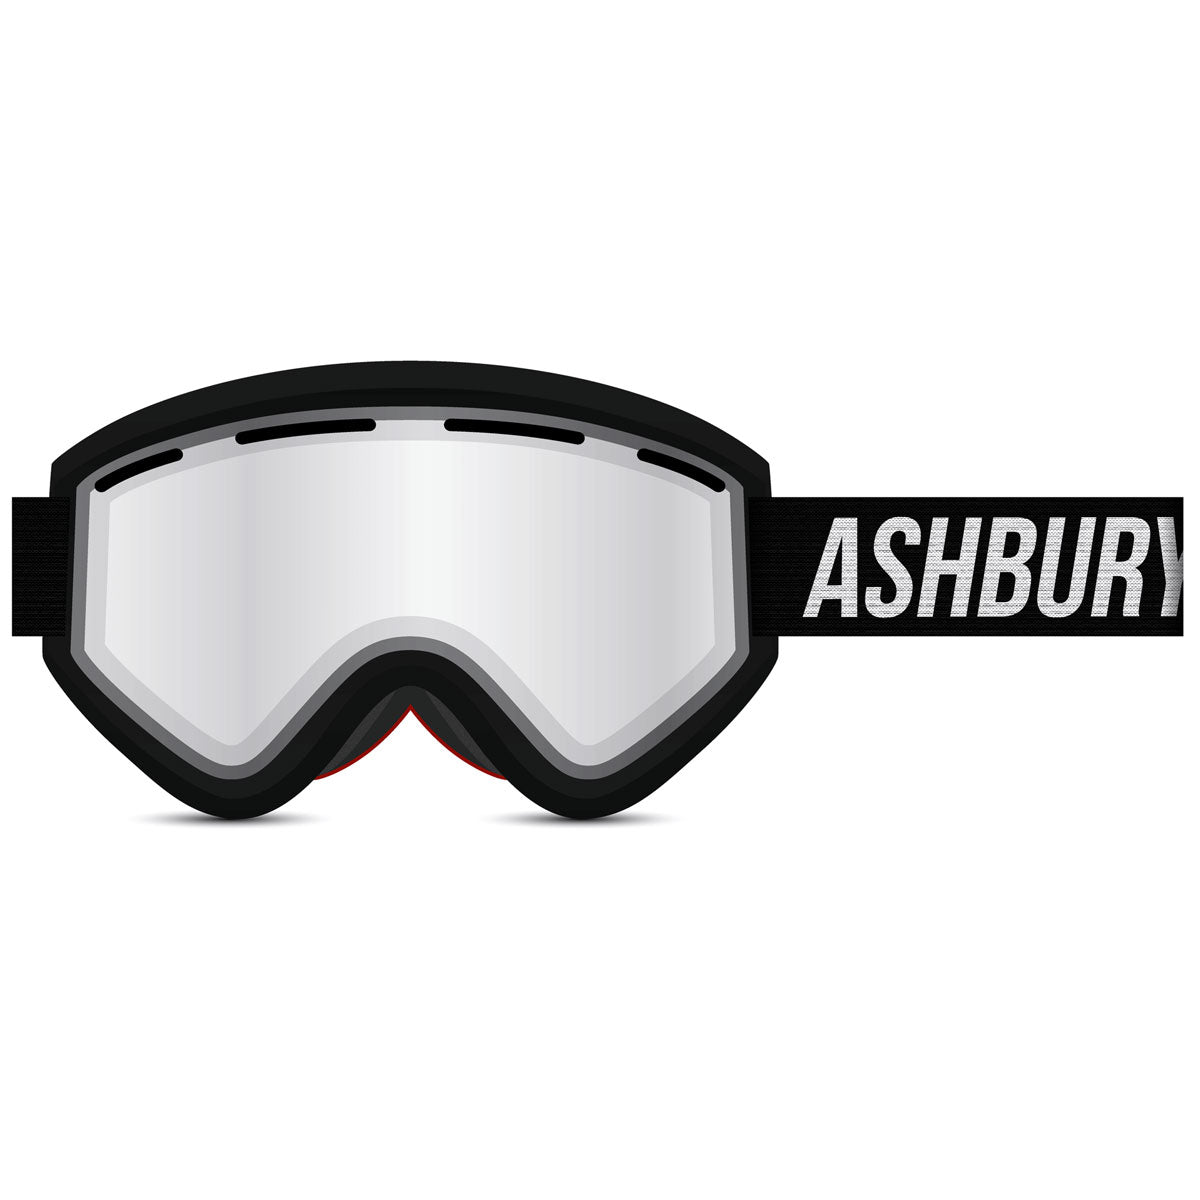 Ashbury Nightvision Snowboard Goggles - Clear image 1